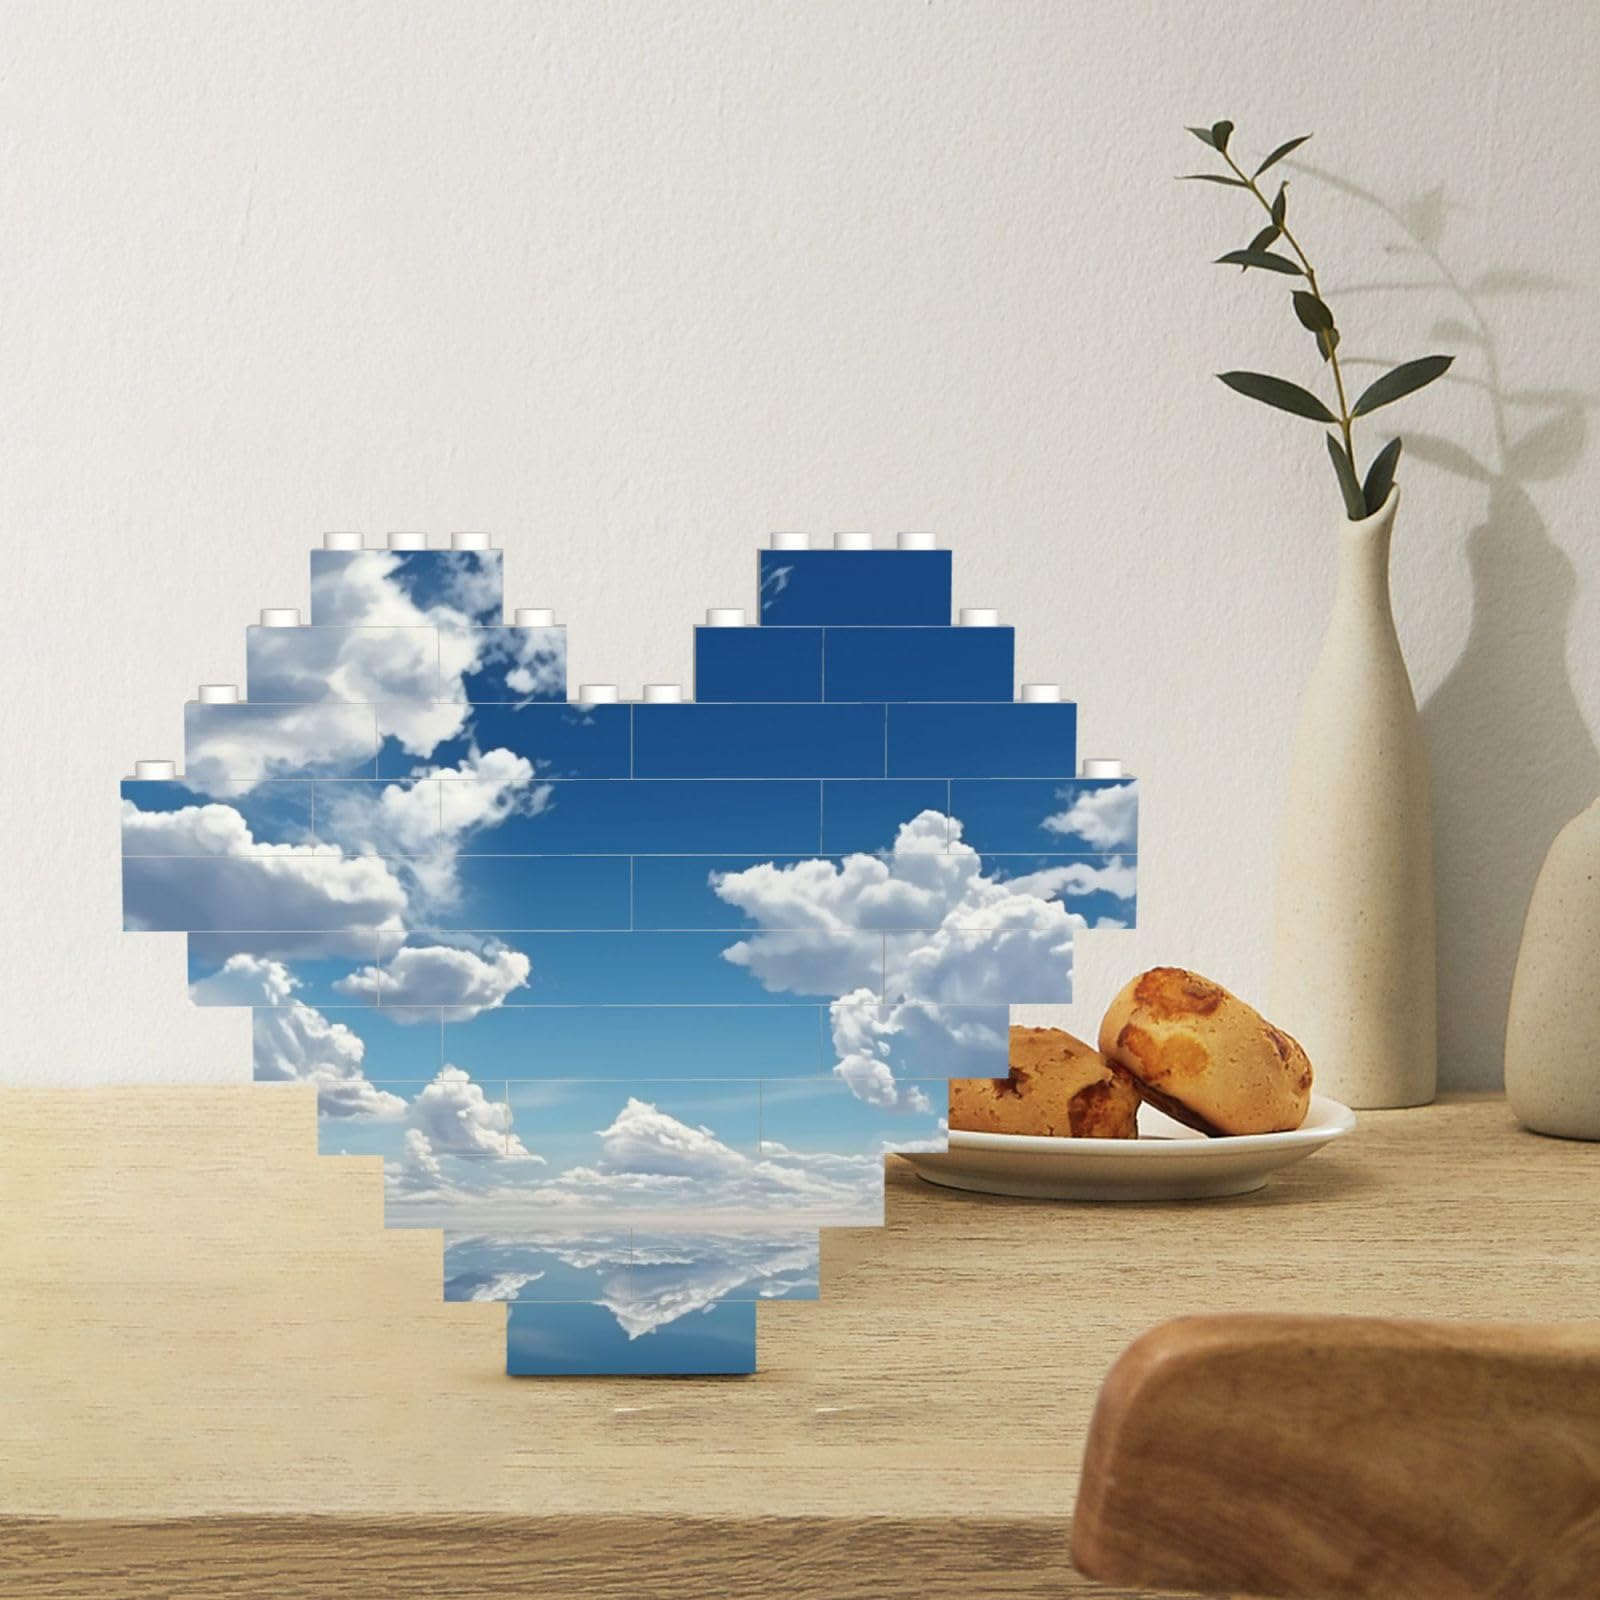 Building Block Puzzle Heart Shaped Building Bricks Blue Sky and White Clouds Puzzles Block Puzzle for Adults 3D Micro Building Blocks for Home Decor Bricks Set